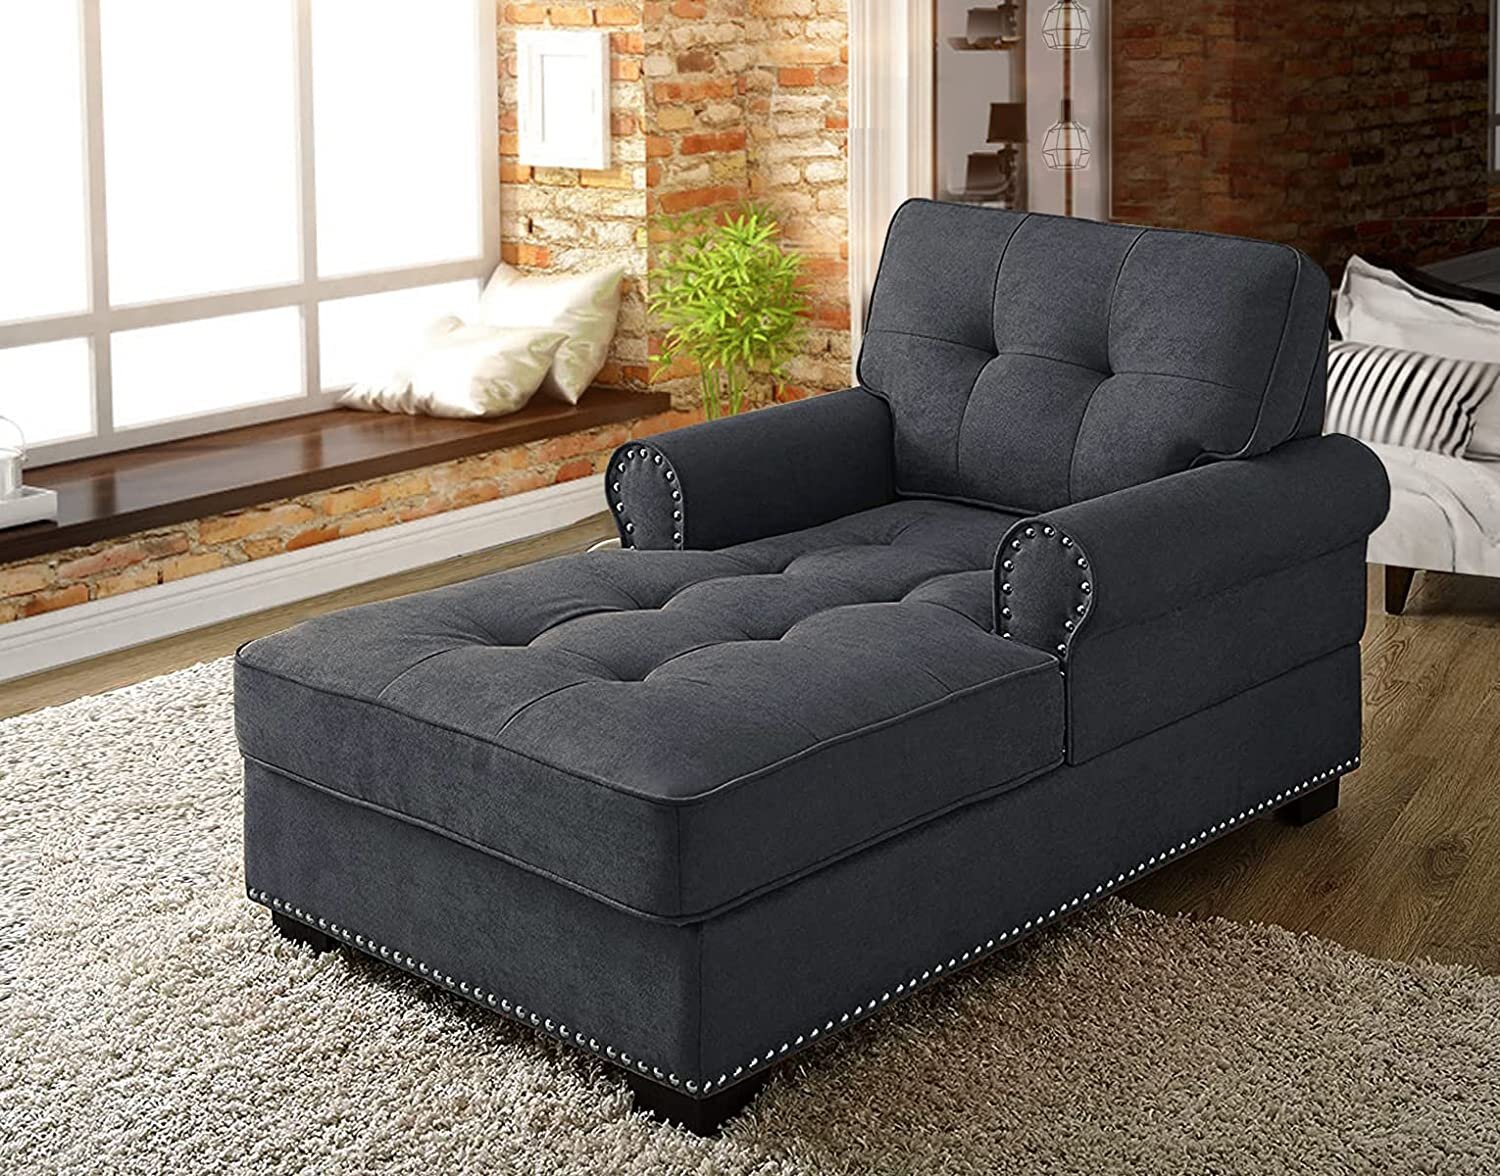 Kimmell Chaise Lounge